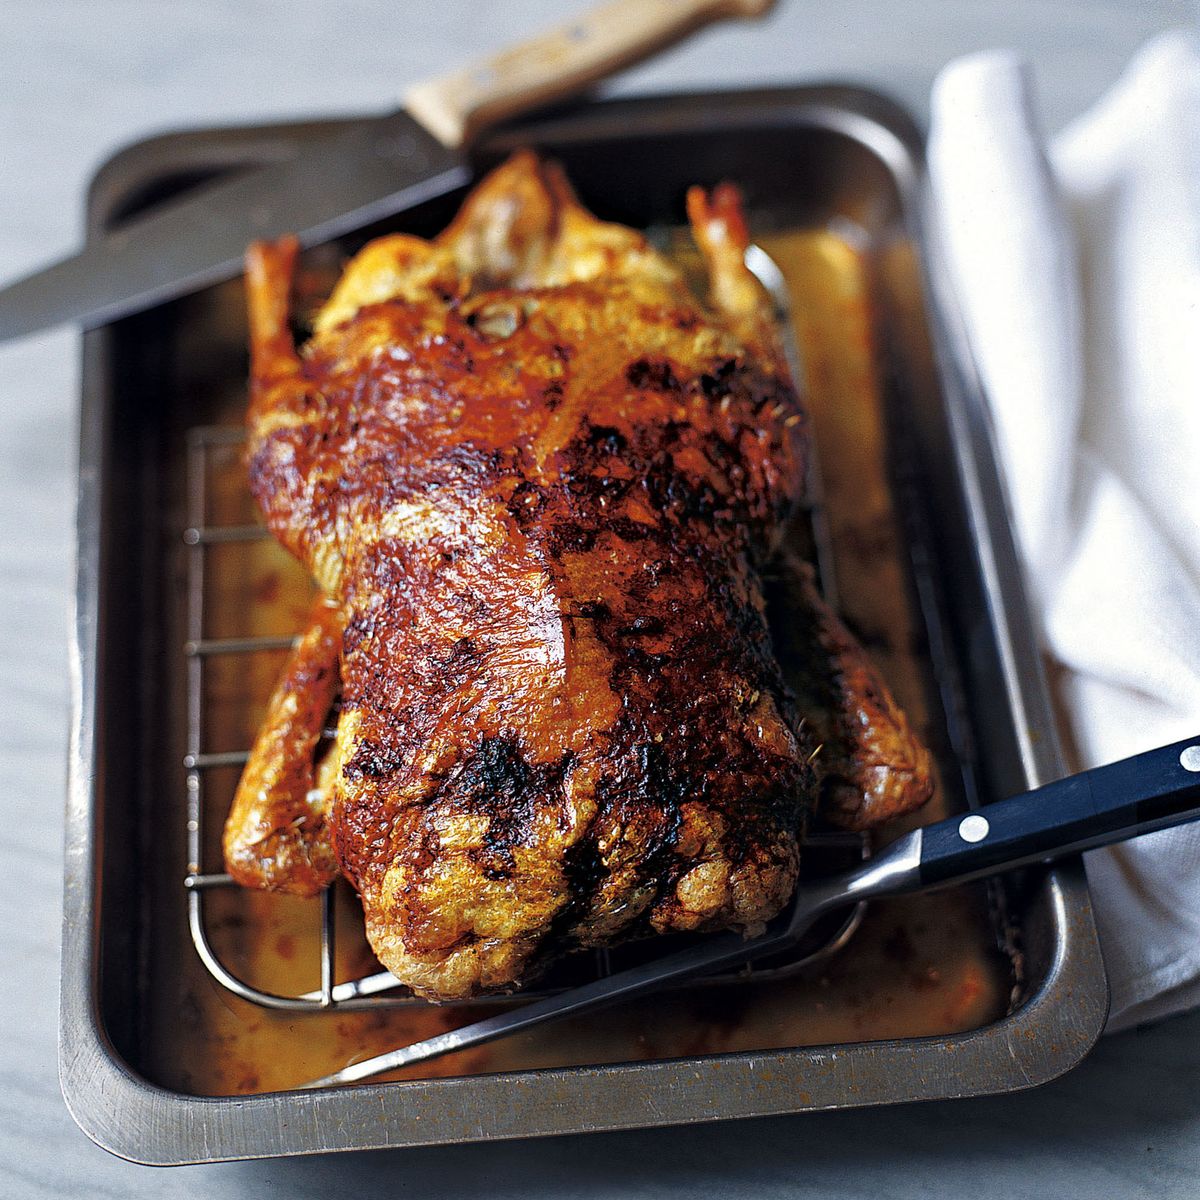 This easy roast duck recipe makes a great alternative to turkey at Christmas time